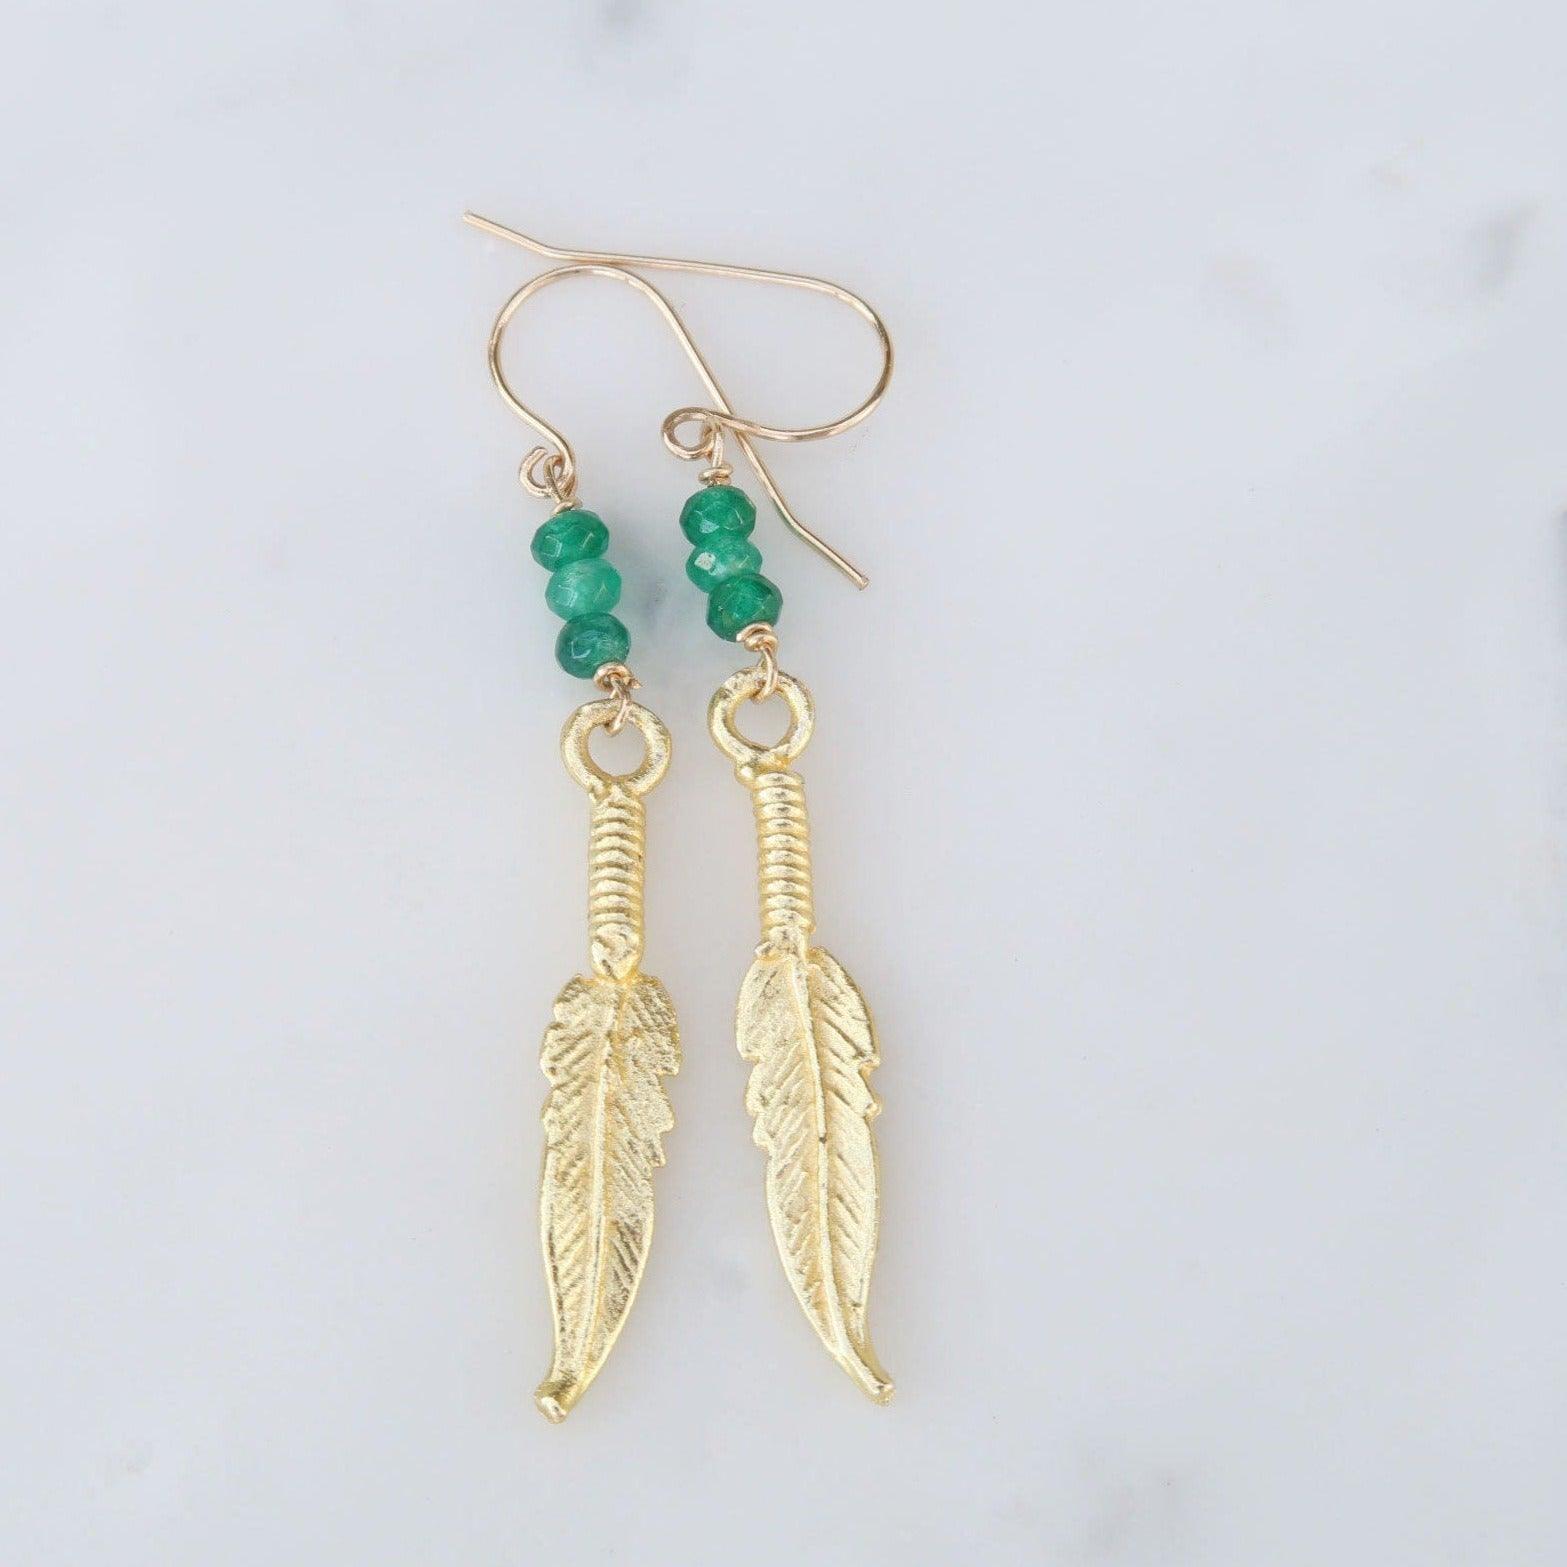 Gold plated healing Gemstone Jade earrings for protection and good luck.